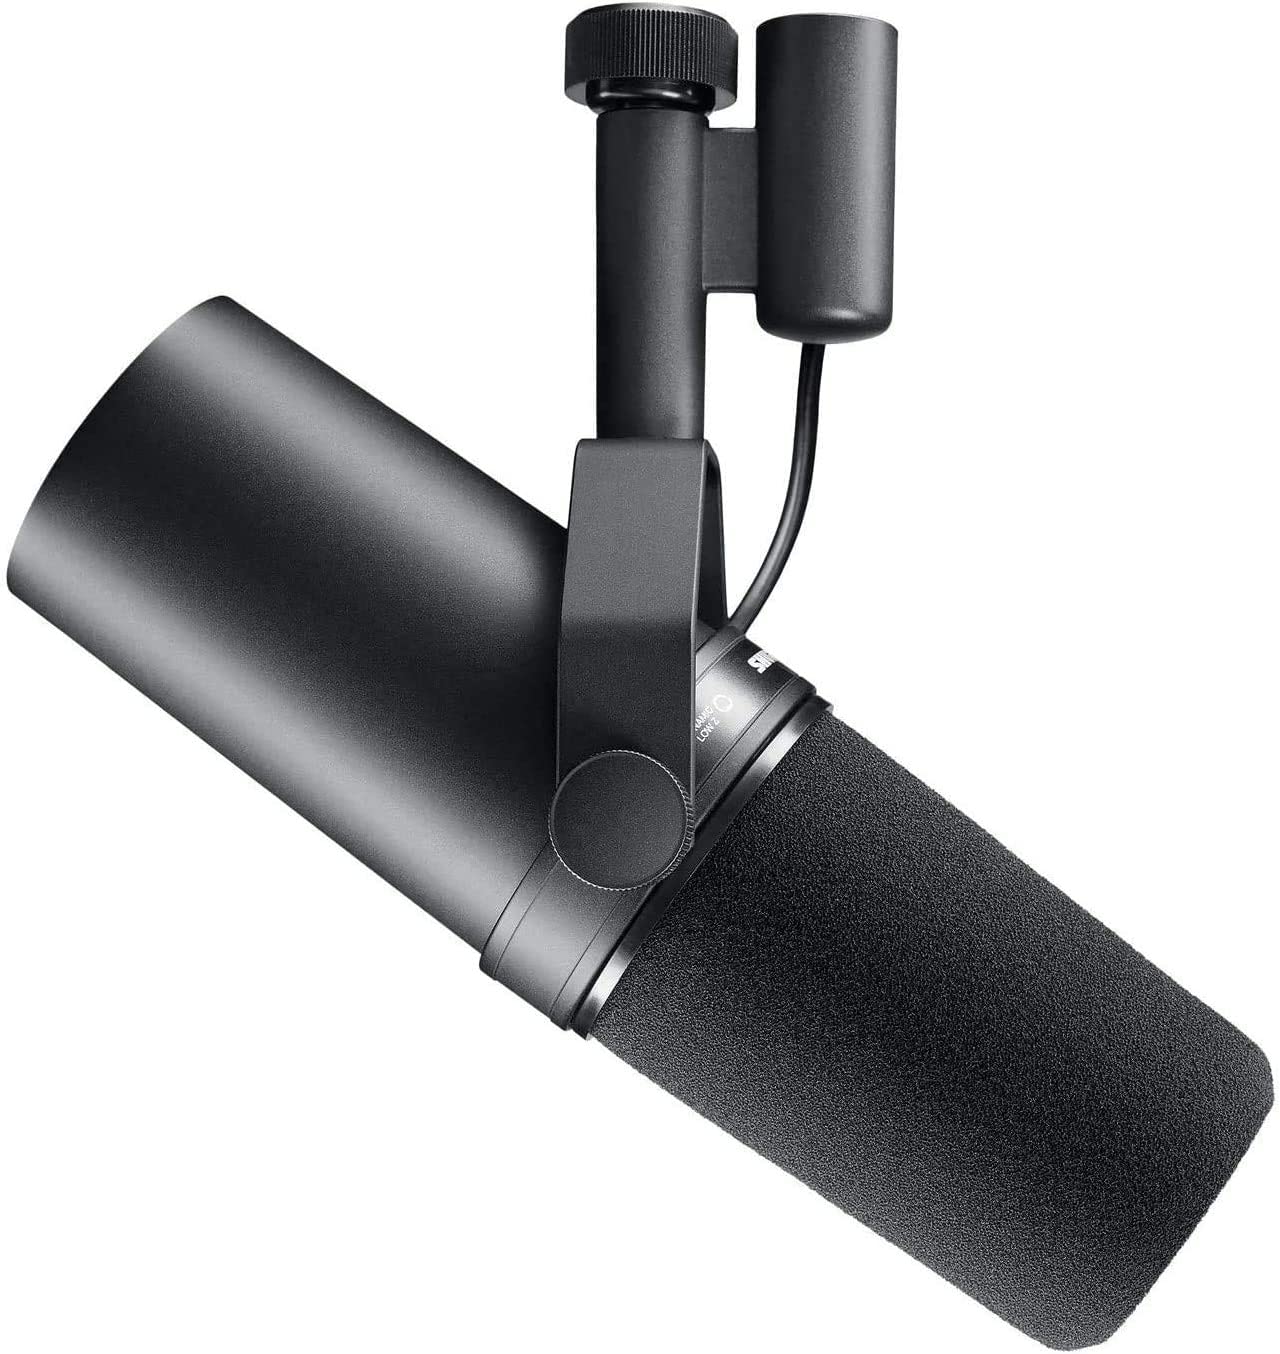 Shure SM7B Vocal Dynamic Microphone for Broadcast, Podcast & Recording, XLR Studio Mic for Music & Speech, Wide-Range Frequency, Warm & Smooth Sound, Rugged Construction, Detachable Windscreen - Black - image 1 of 6